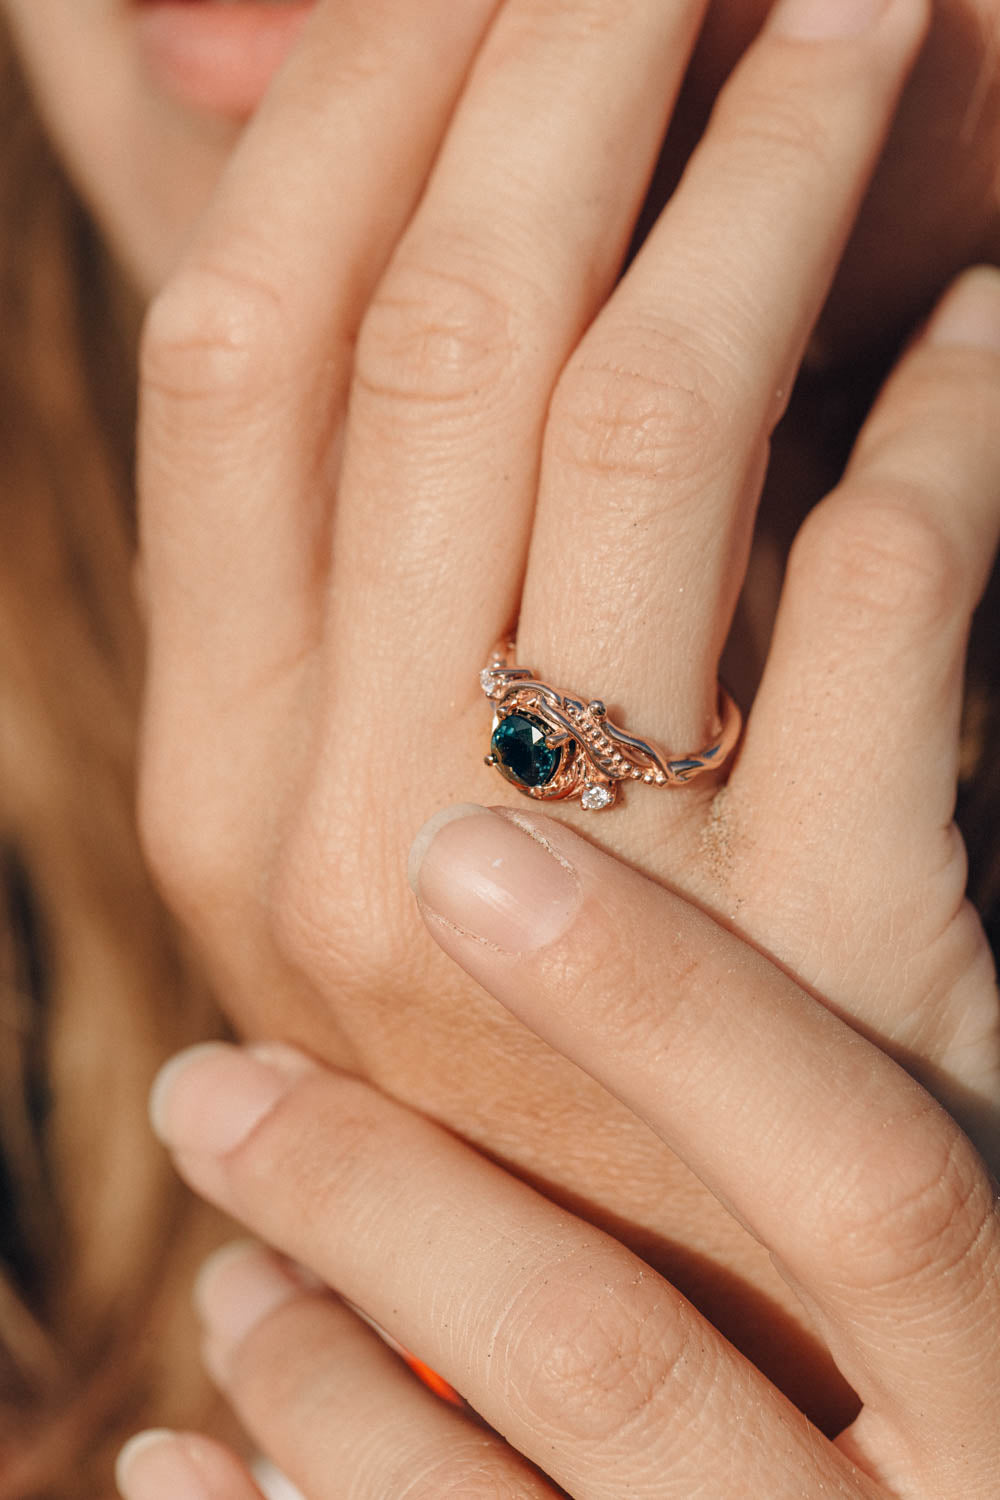 Teal sapphire cushion cut engagement ring, rose gold ring with diamonds / Undina - Eden Garden Jewelry™